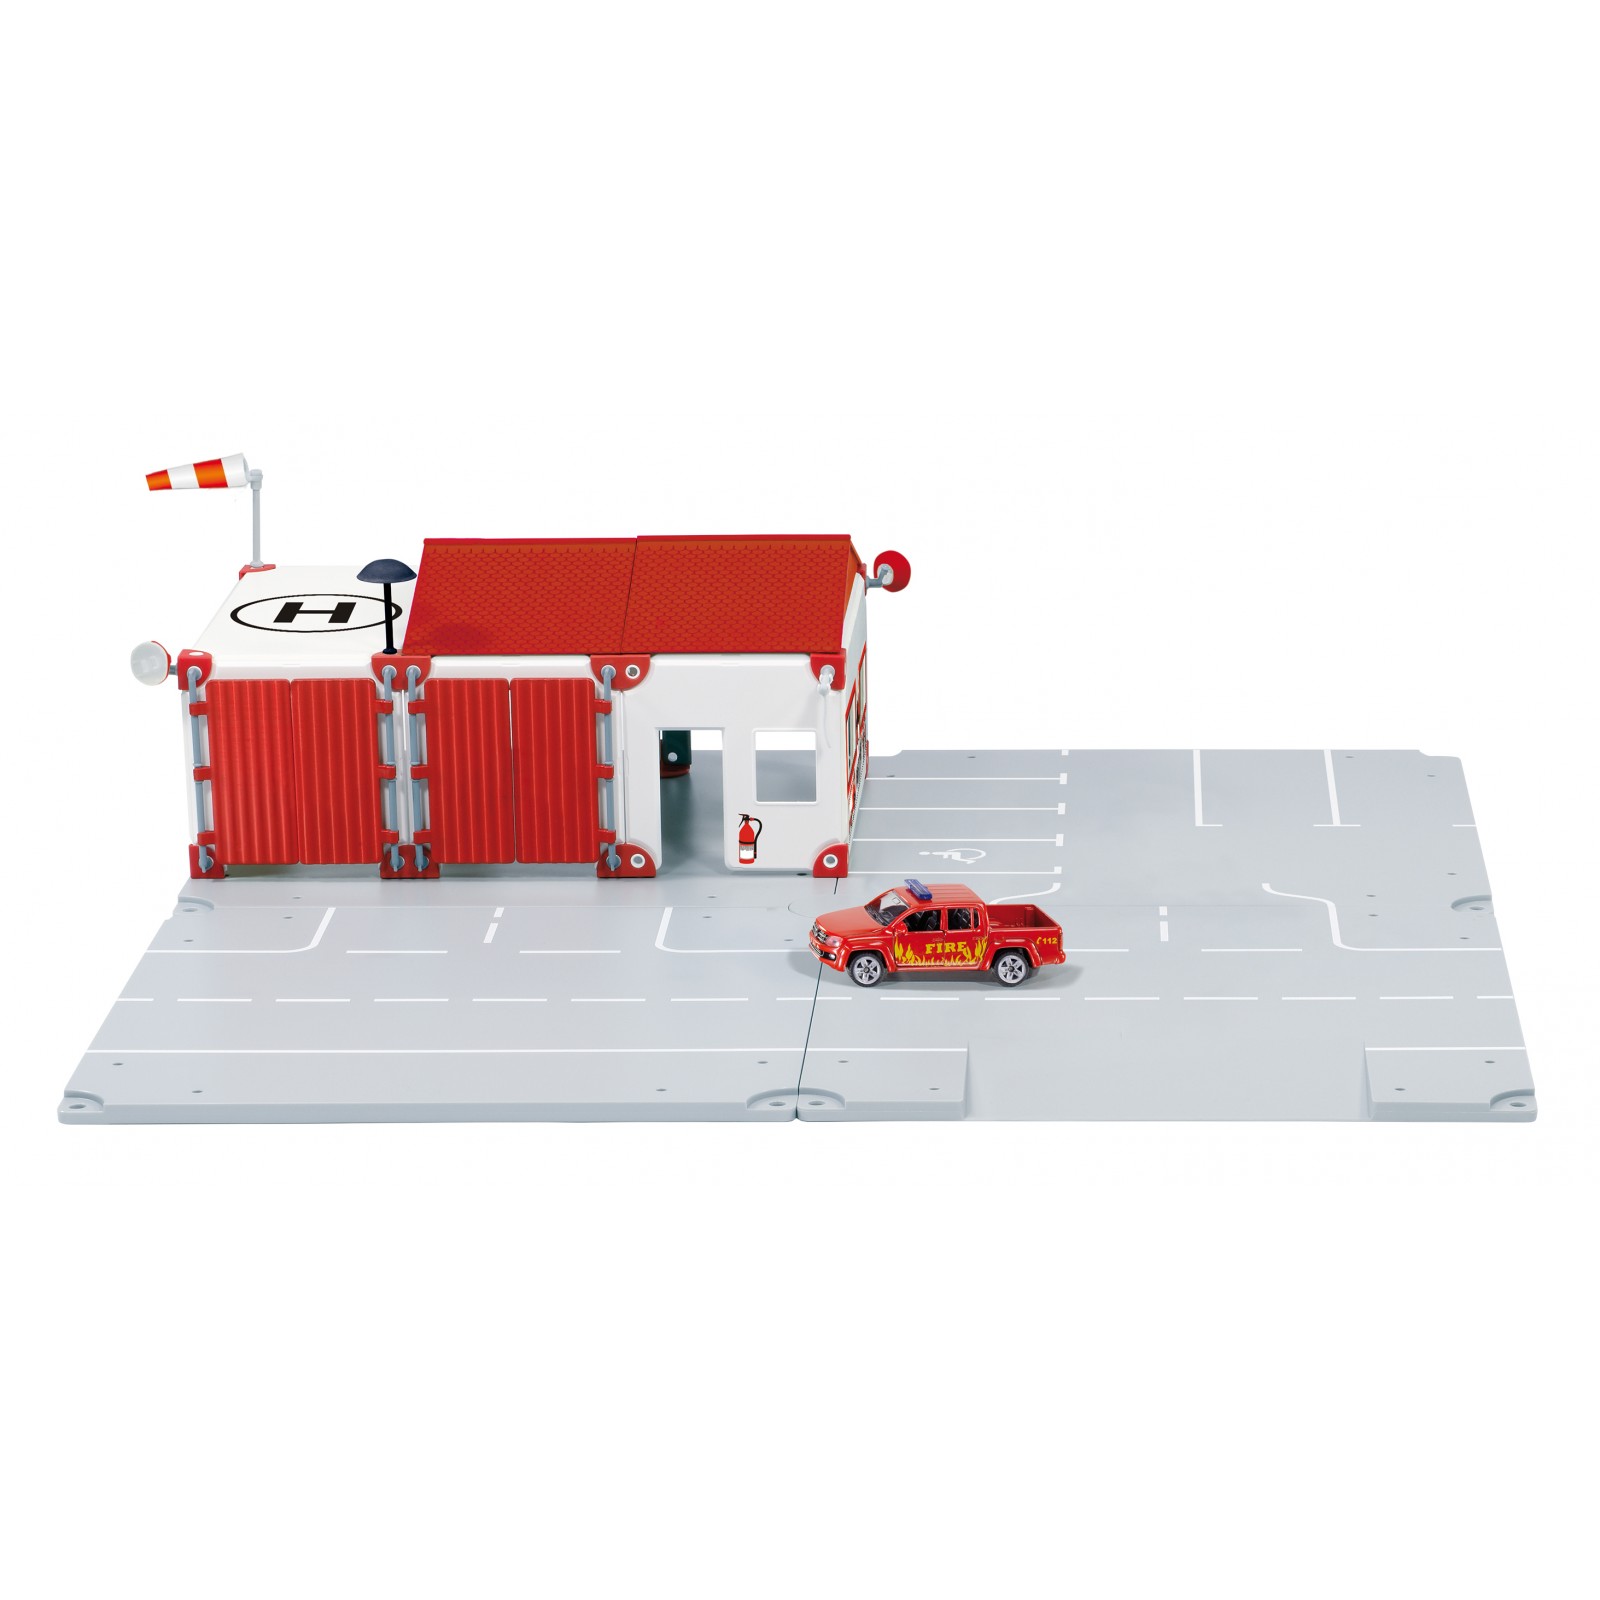 Siku World 5502 Fire Station with Firefighter Pick-up Truck Model Playset 